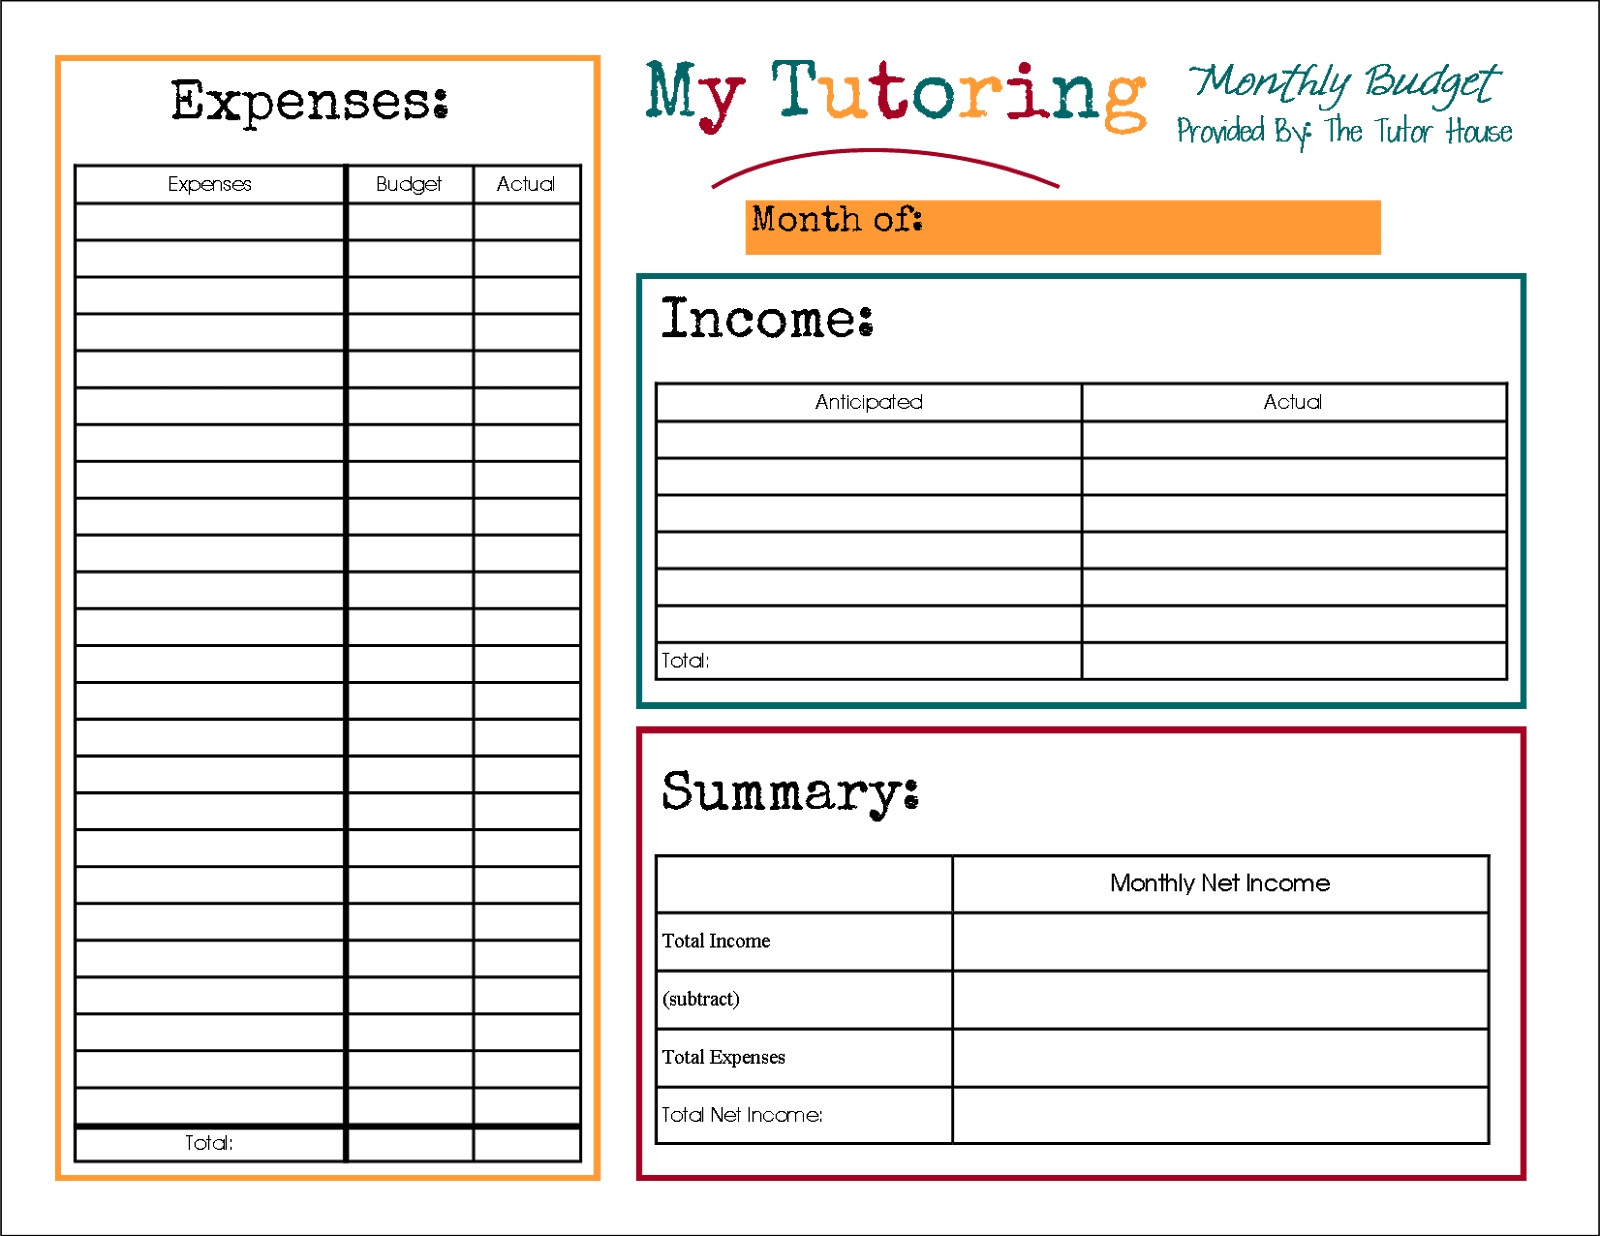 Free Printable Business Forms | Room Surf - Free Printable Business Forms